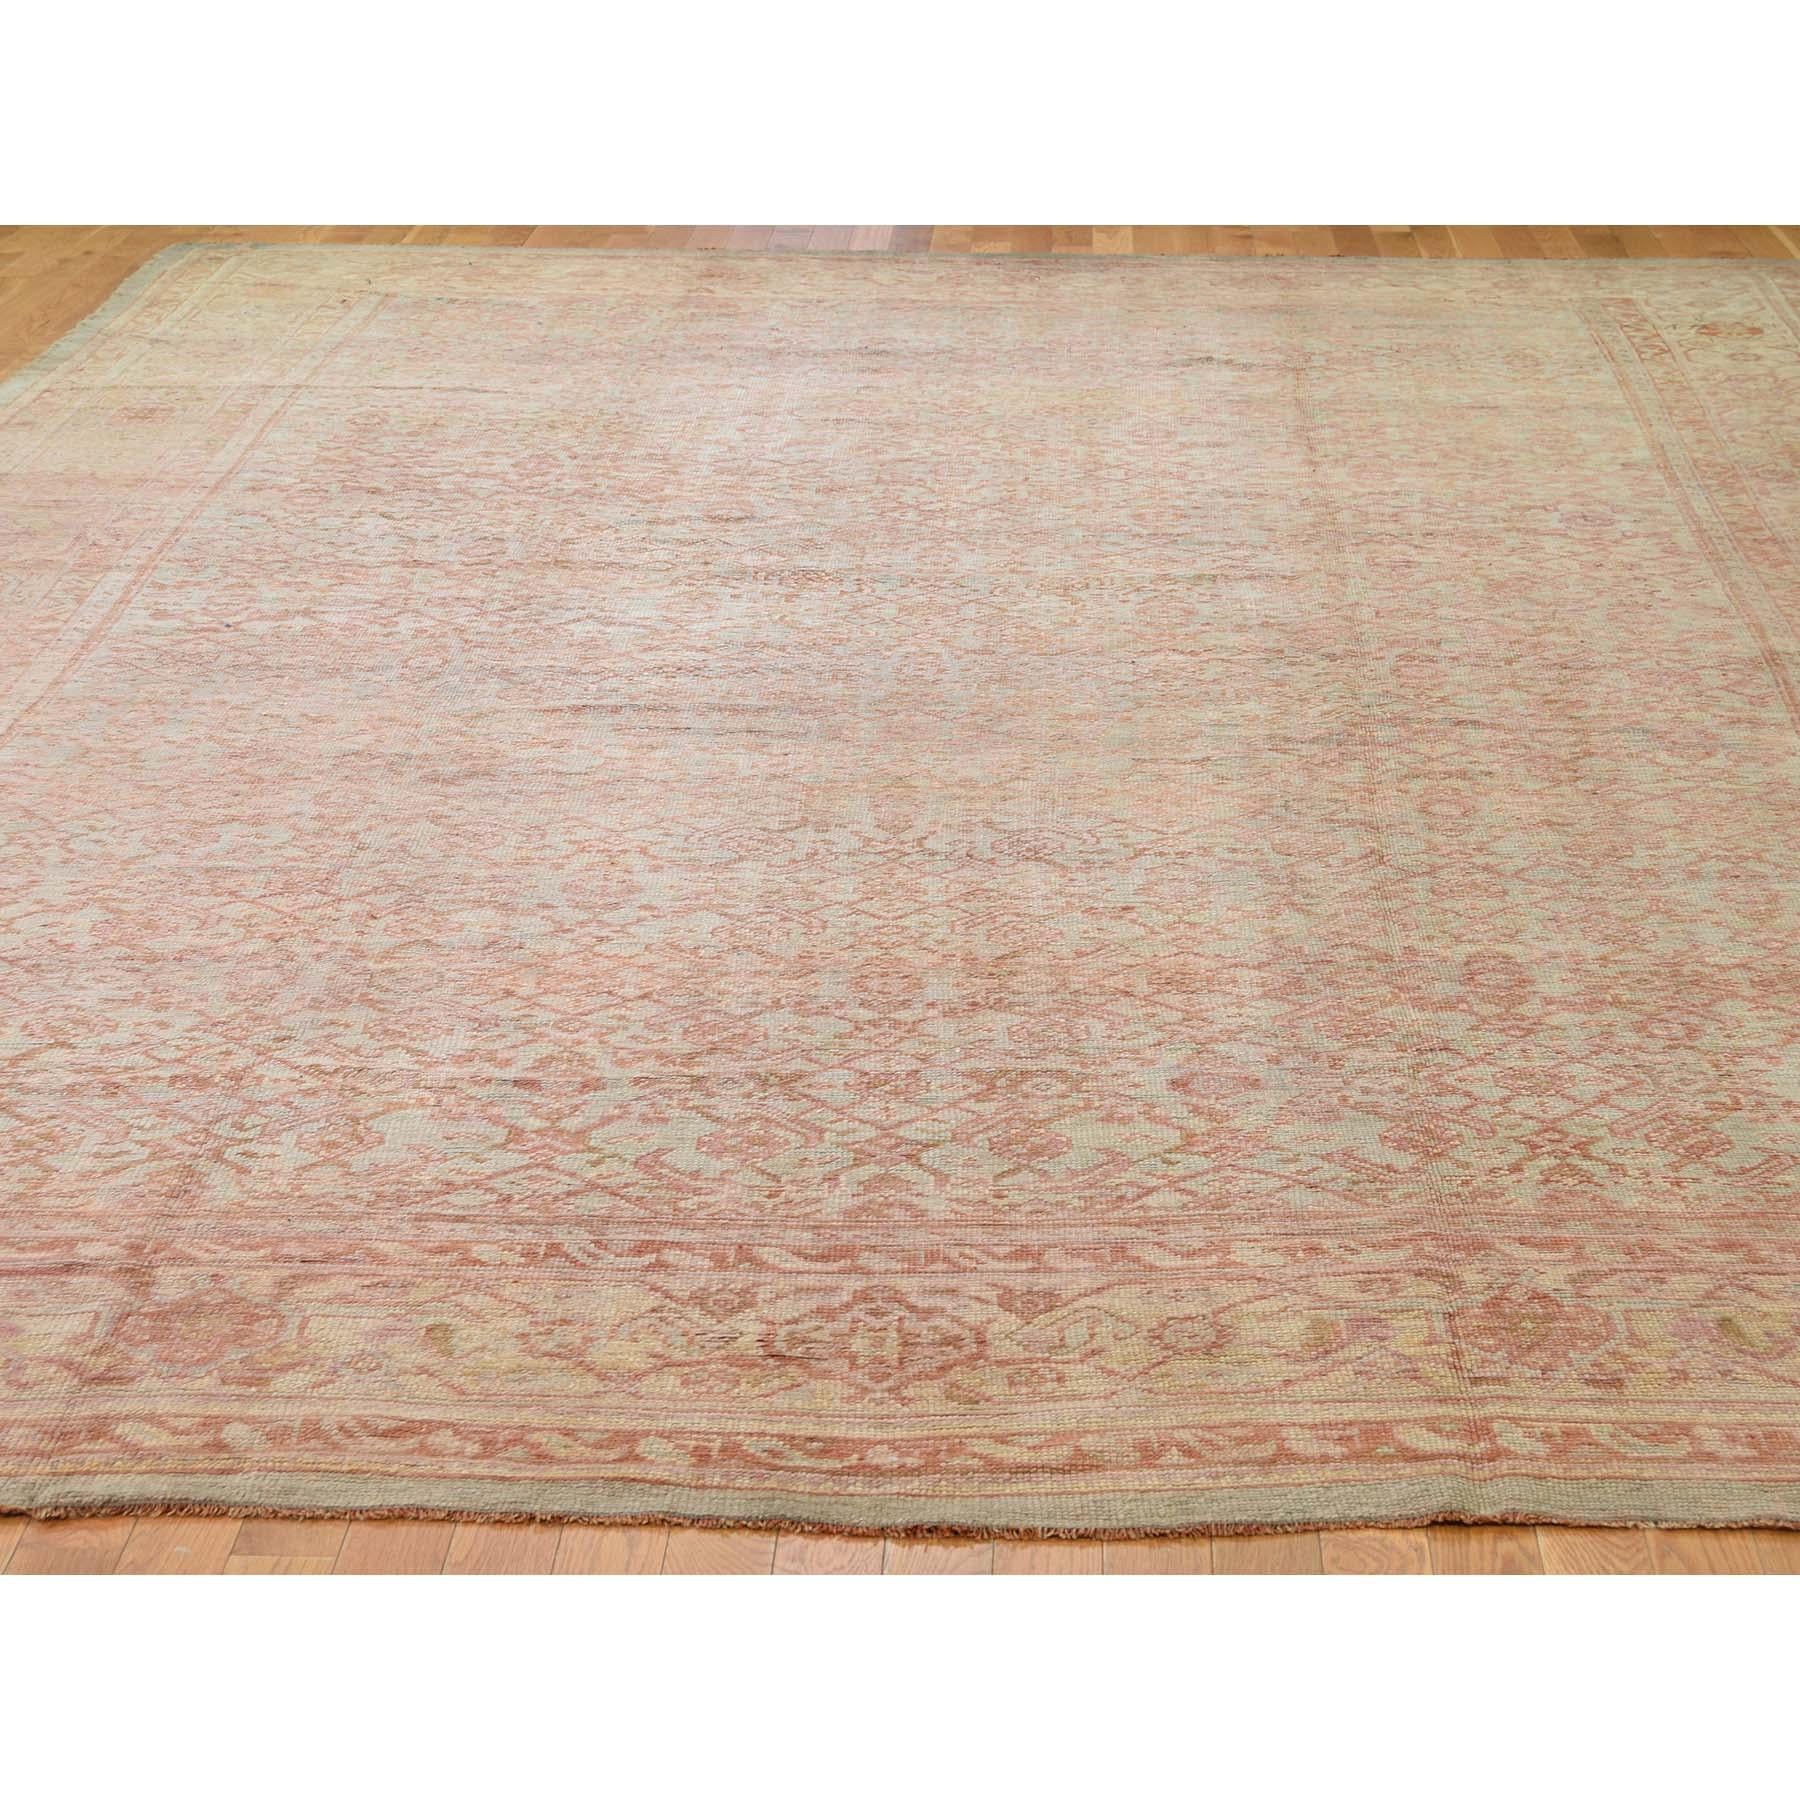 This is a truly genuine one-of-a-kind oversized antique Turkish Oushak exc condition pure wool rug. It has been Knotted for months and months in the centuries-old Persian weaving craftsmanship techniques by expert artisans. 


Primary materials: